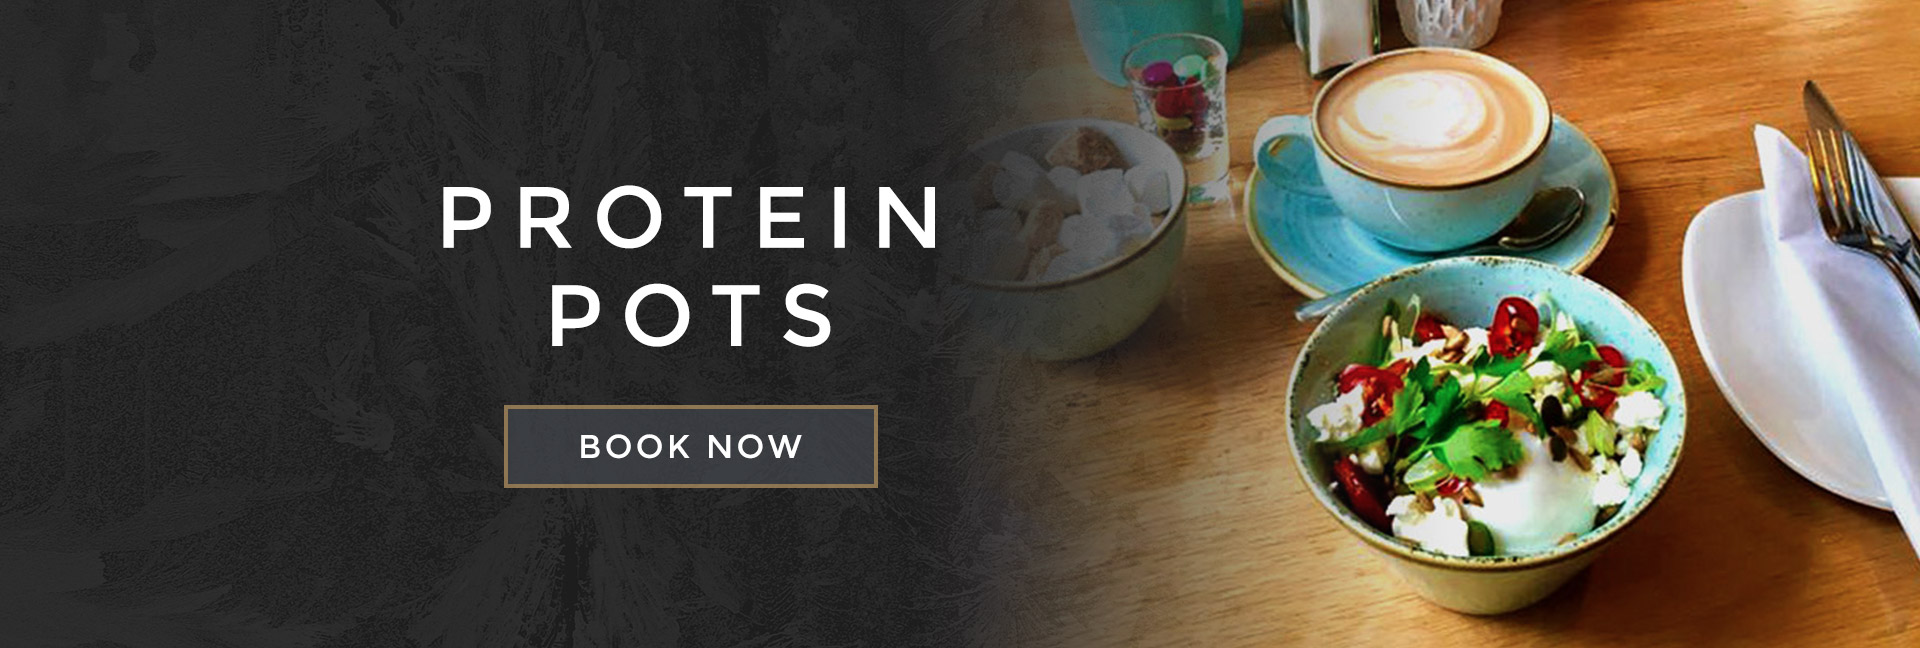 Protein pots at All Bar One Nottingham - Book your table